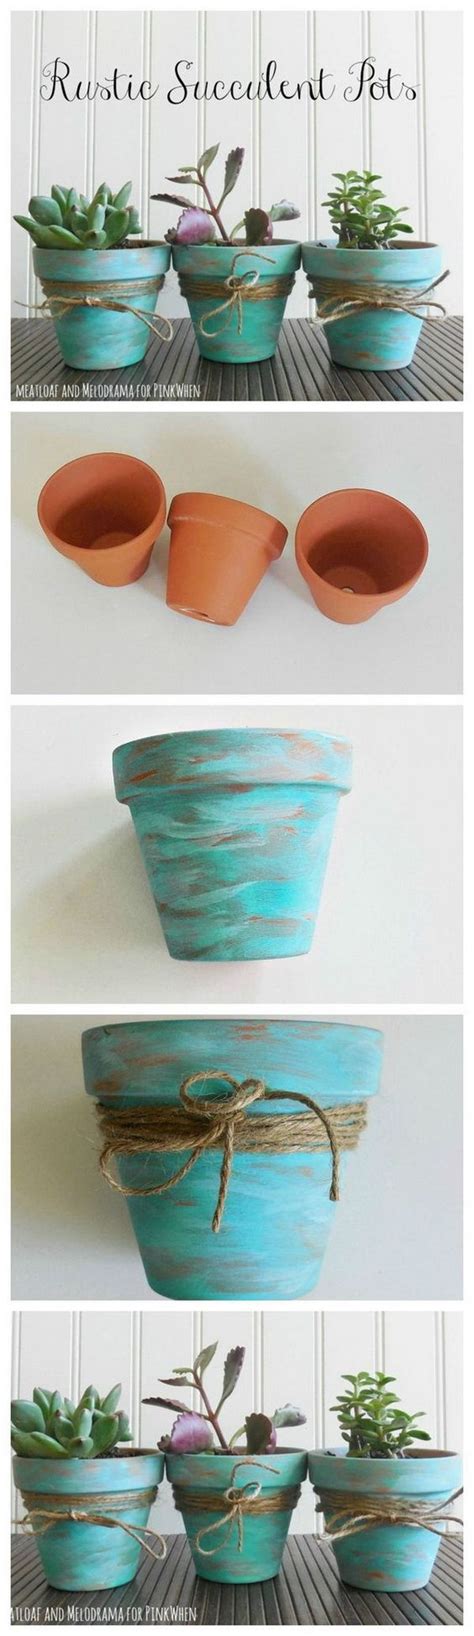 17 Creative Ideas To Decorate With Terra Cotta Flower Pots Terracotta